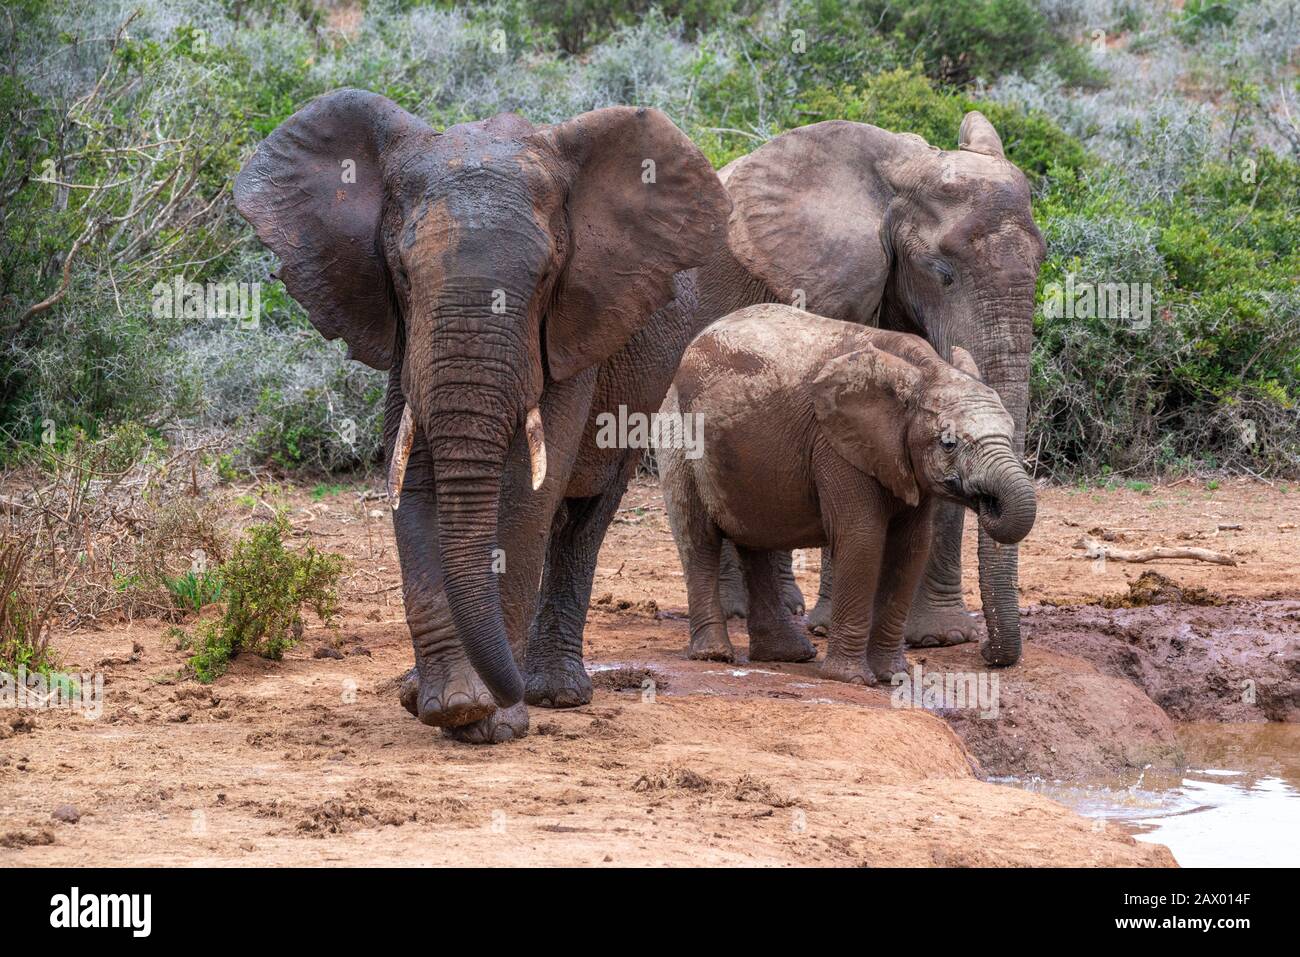 African elephants or African bush elephants cooling down at a waterhole in the Addo Elephant National Park, Eastern Cape, South Africa Stock Photo